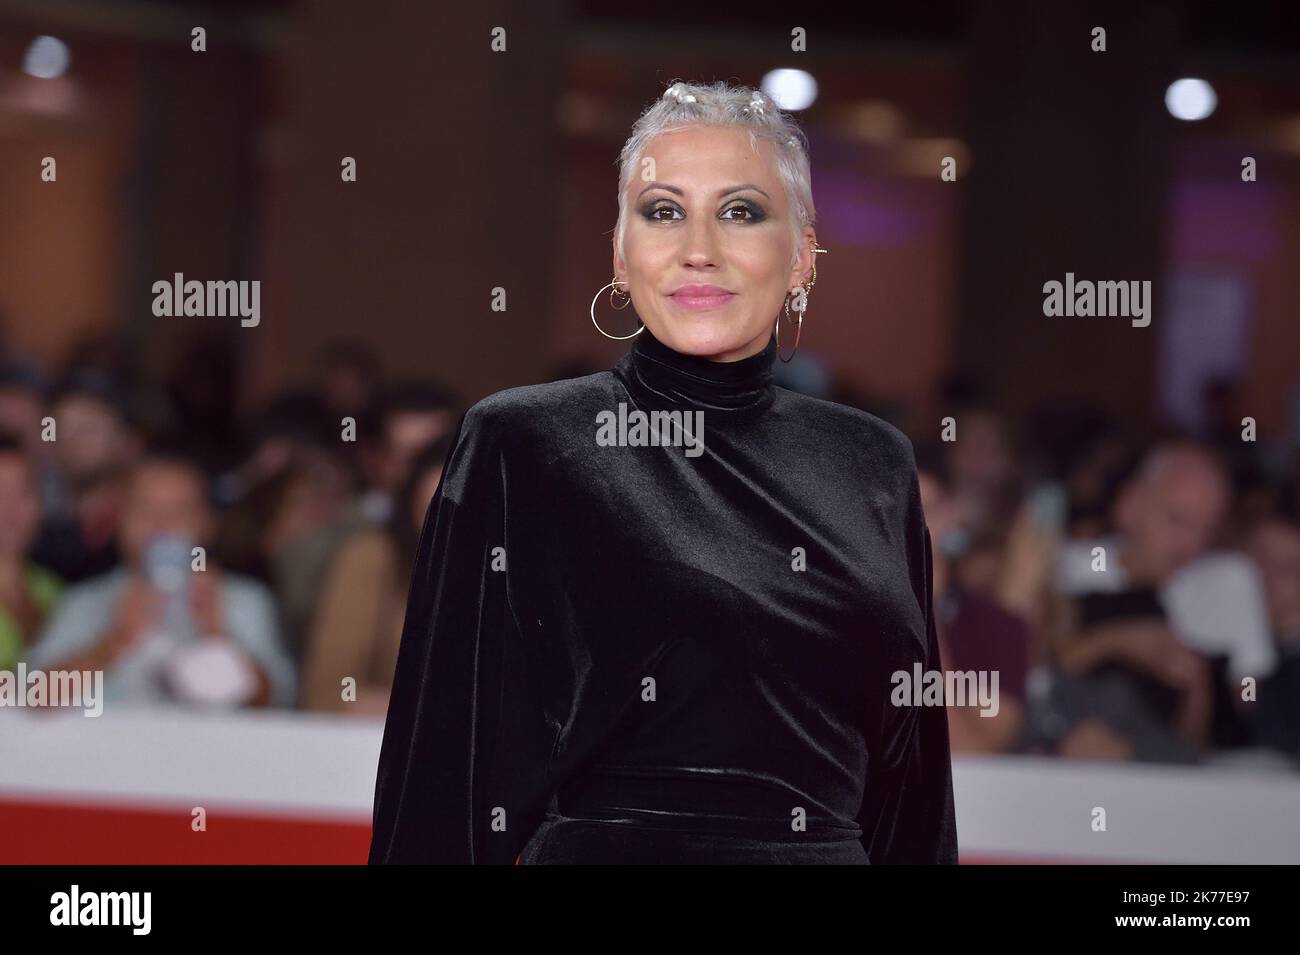 Rome, Italy. 16th Oct, 2022. ROME, ITALY - OCTOBER 16: Malika Ayane attends the red carpet for 'La Divina Cometa' and 'Il Maledetto' during the 17th Rome Film Festival at Auditorium Parco Della Musica on October 16, 2022 in Rome, Italy. Credit: dpa/Alamy Live News Stock Photo